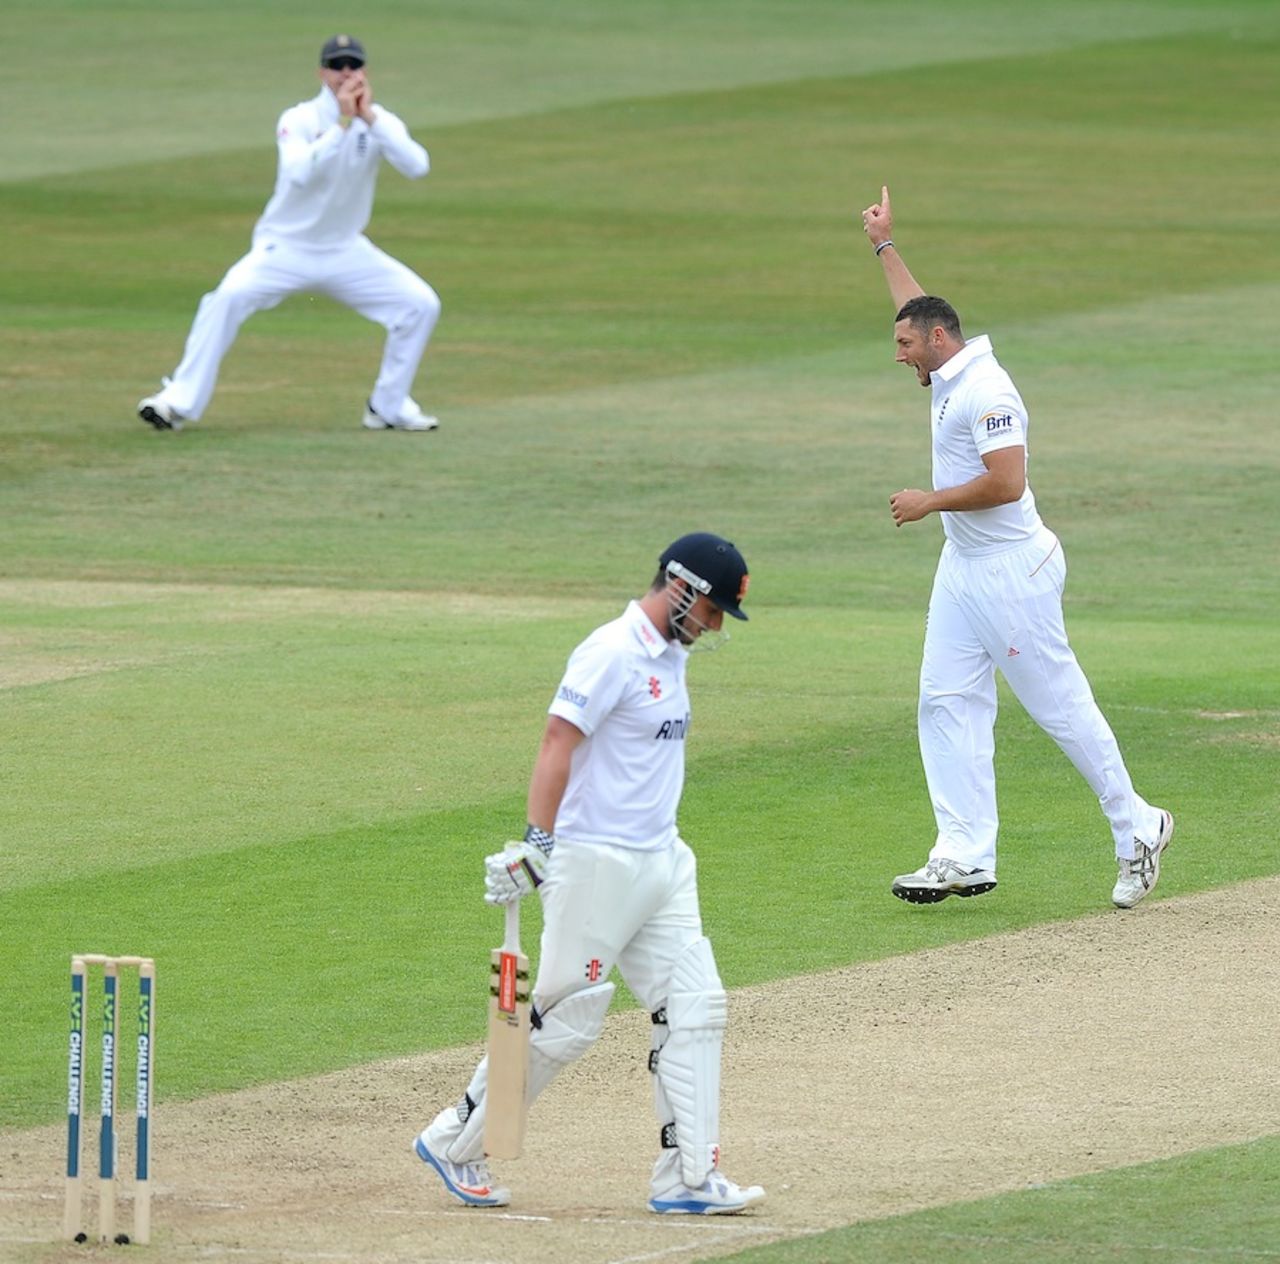 Tim Bresnan had Hamish Rutherford caught at extra cover, Essex v England, 2nd day, Chelmsford, July 1, 2013